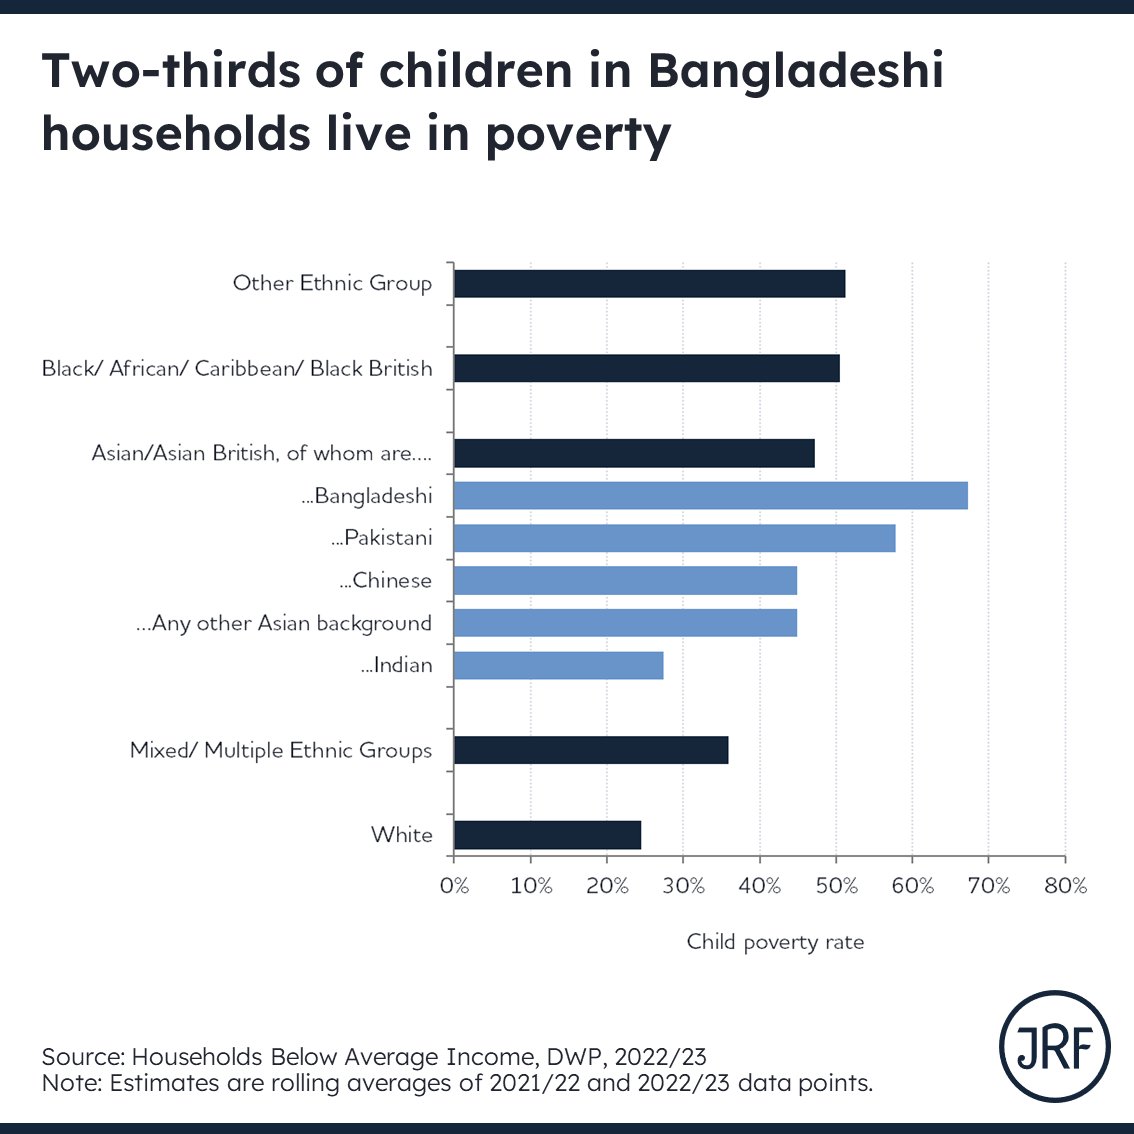 Today's official statistics paint a bleak picture of poverty in the UK 3 in 10 children live in poverty - but even that hides some shockingly high levels of poverty in some groups Child poverty has increased in Bangladeshi households, where 2 in 3 children now live in poverty